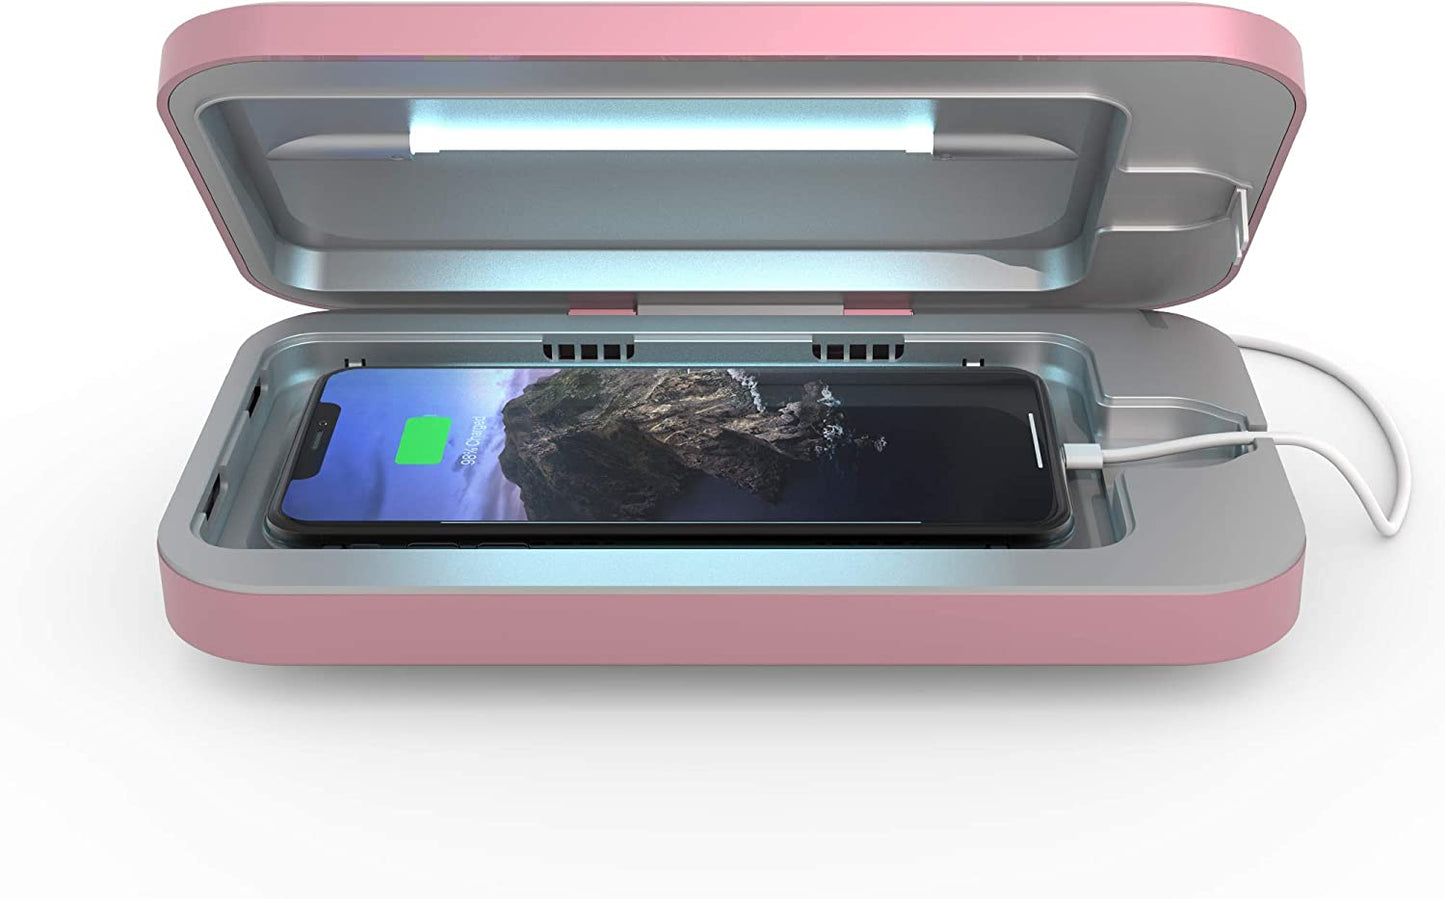 UV Smartphone Sanitizer & Universal Charger Patented & Clinically Proven 360 Degree UV Light Disinfector